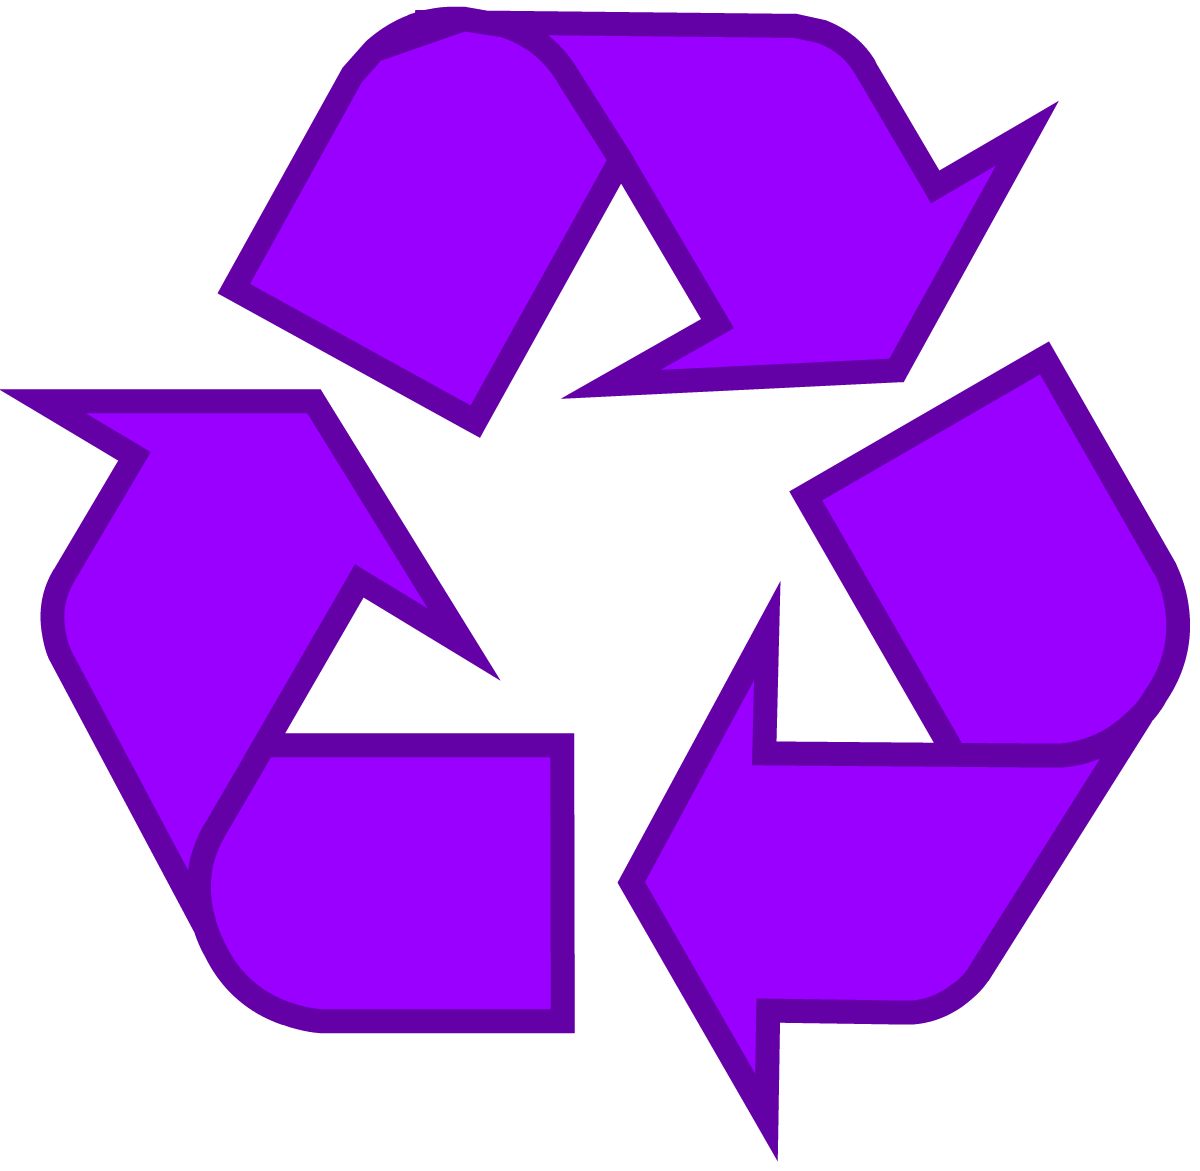 Blue Recycle Logo - Recycling Symbol - Download the Original Recycle Logo